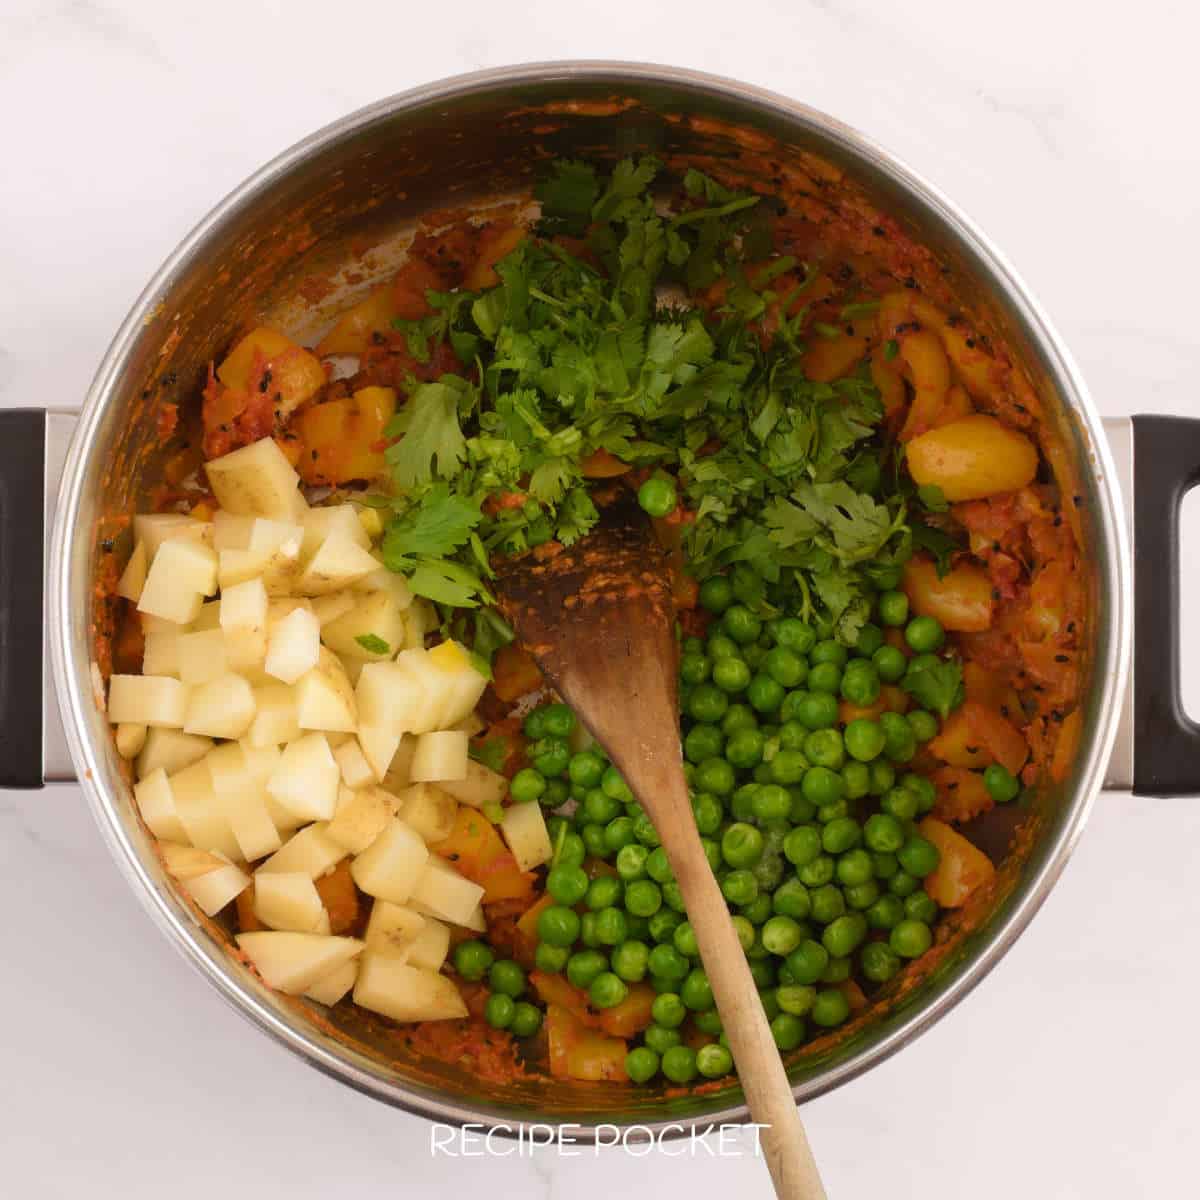 Potatoes, peas and coriander in a pot.